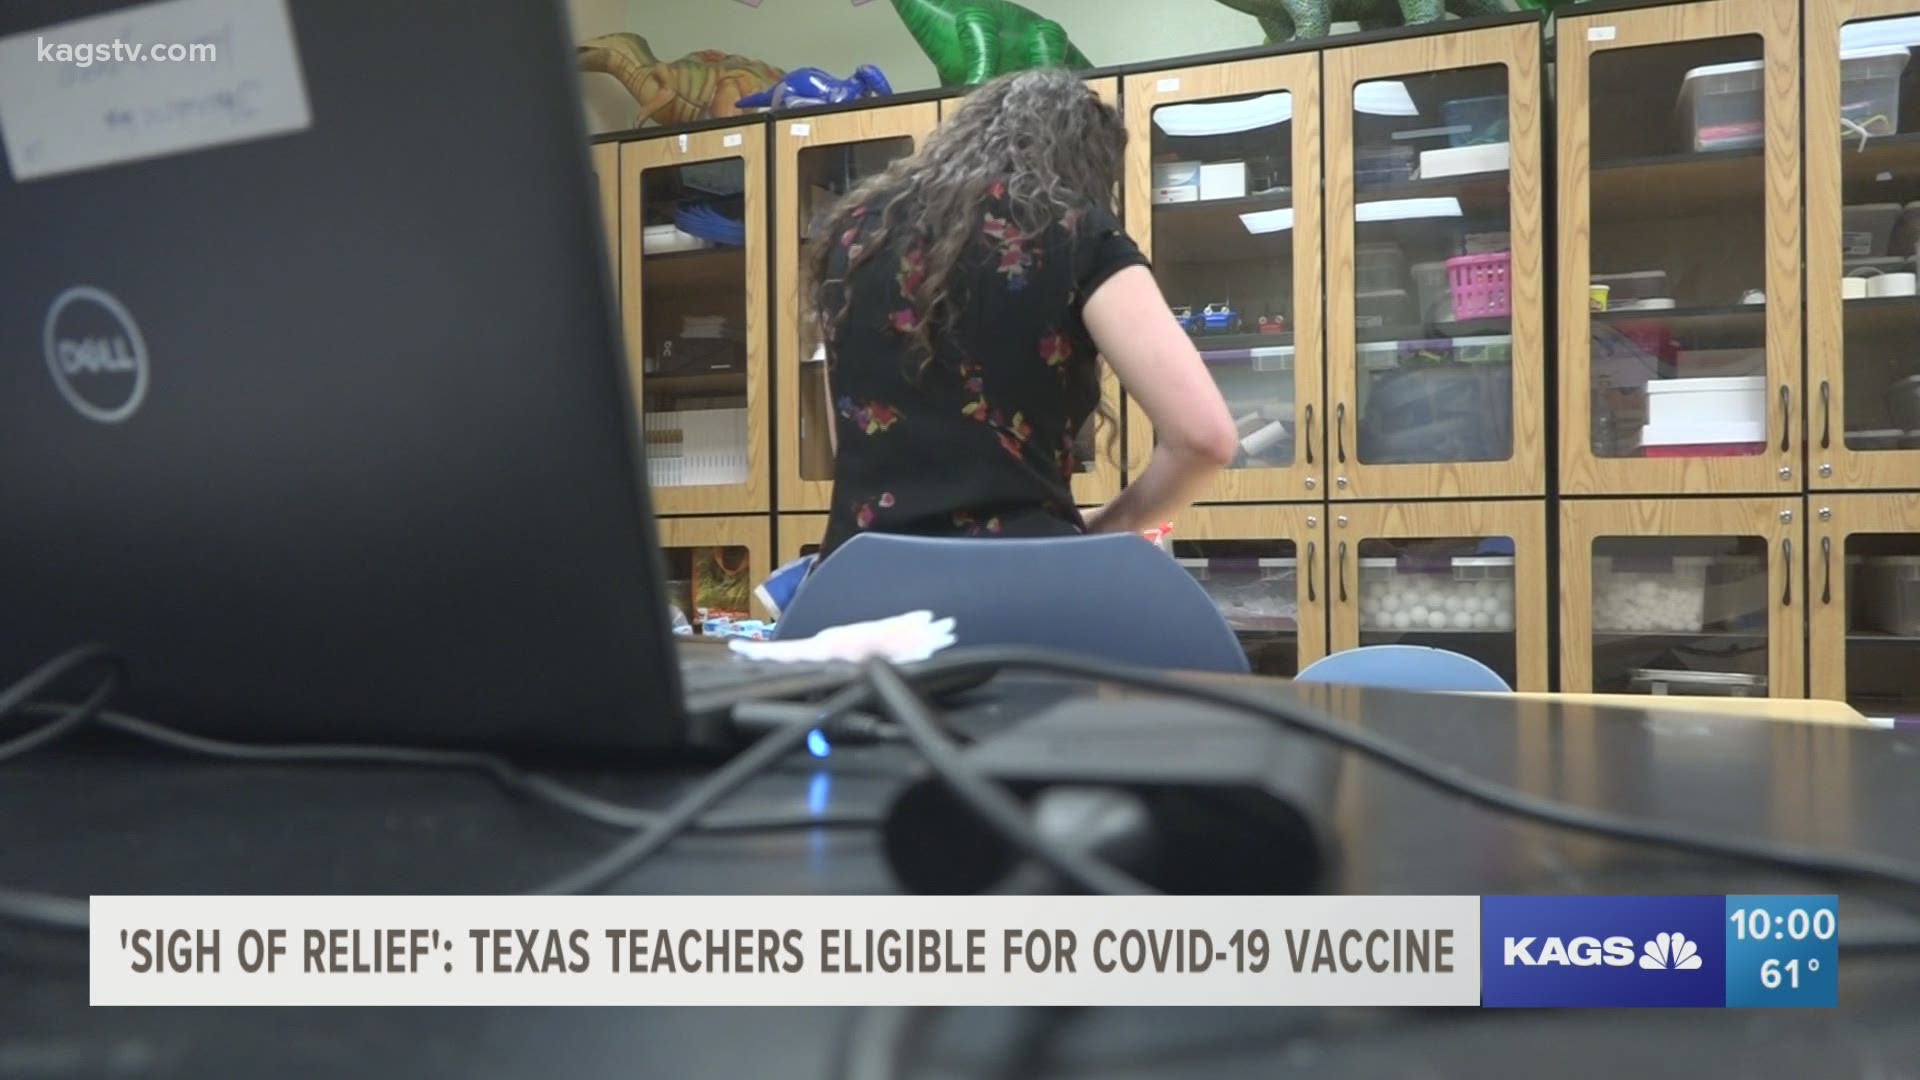 The DSHS expanded the list of people eligible for the COVID-19 vaccine to include teachers and childcare providers.